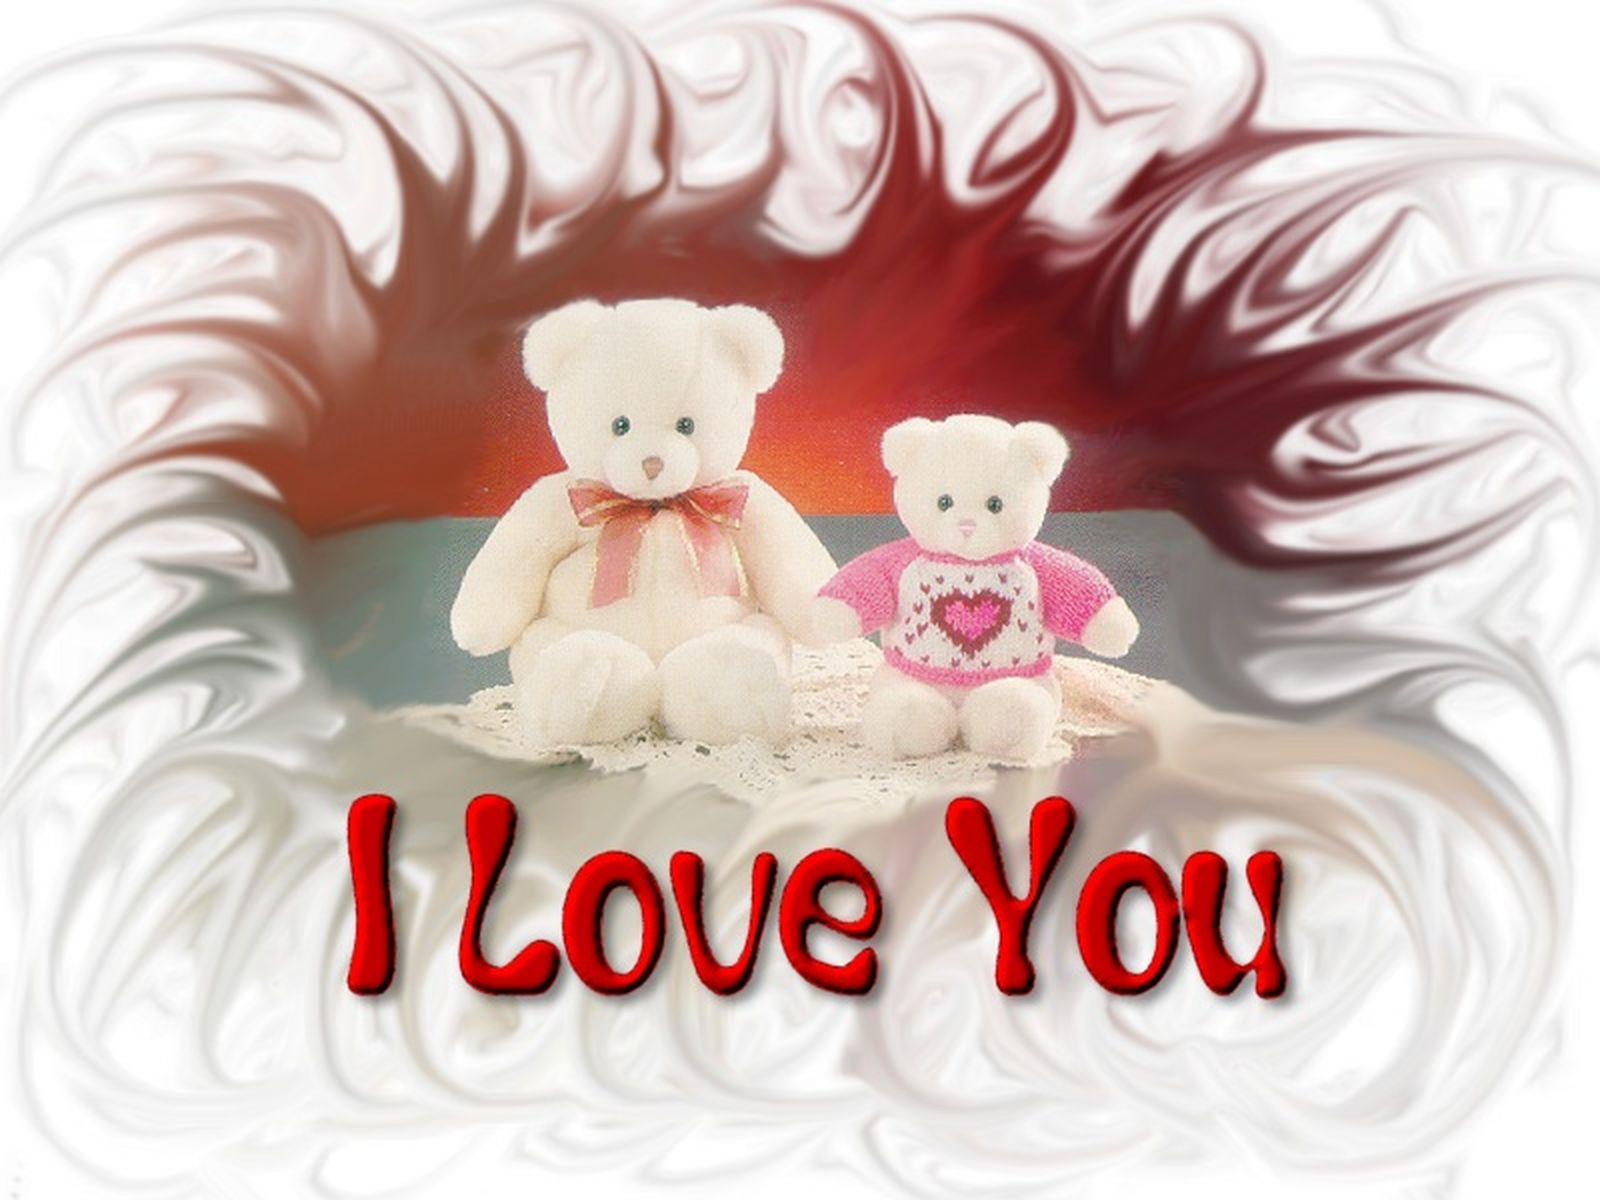 i love u with teddy bear hd wallpapers free | Free wallpapers